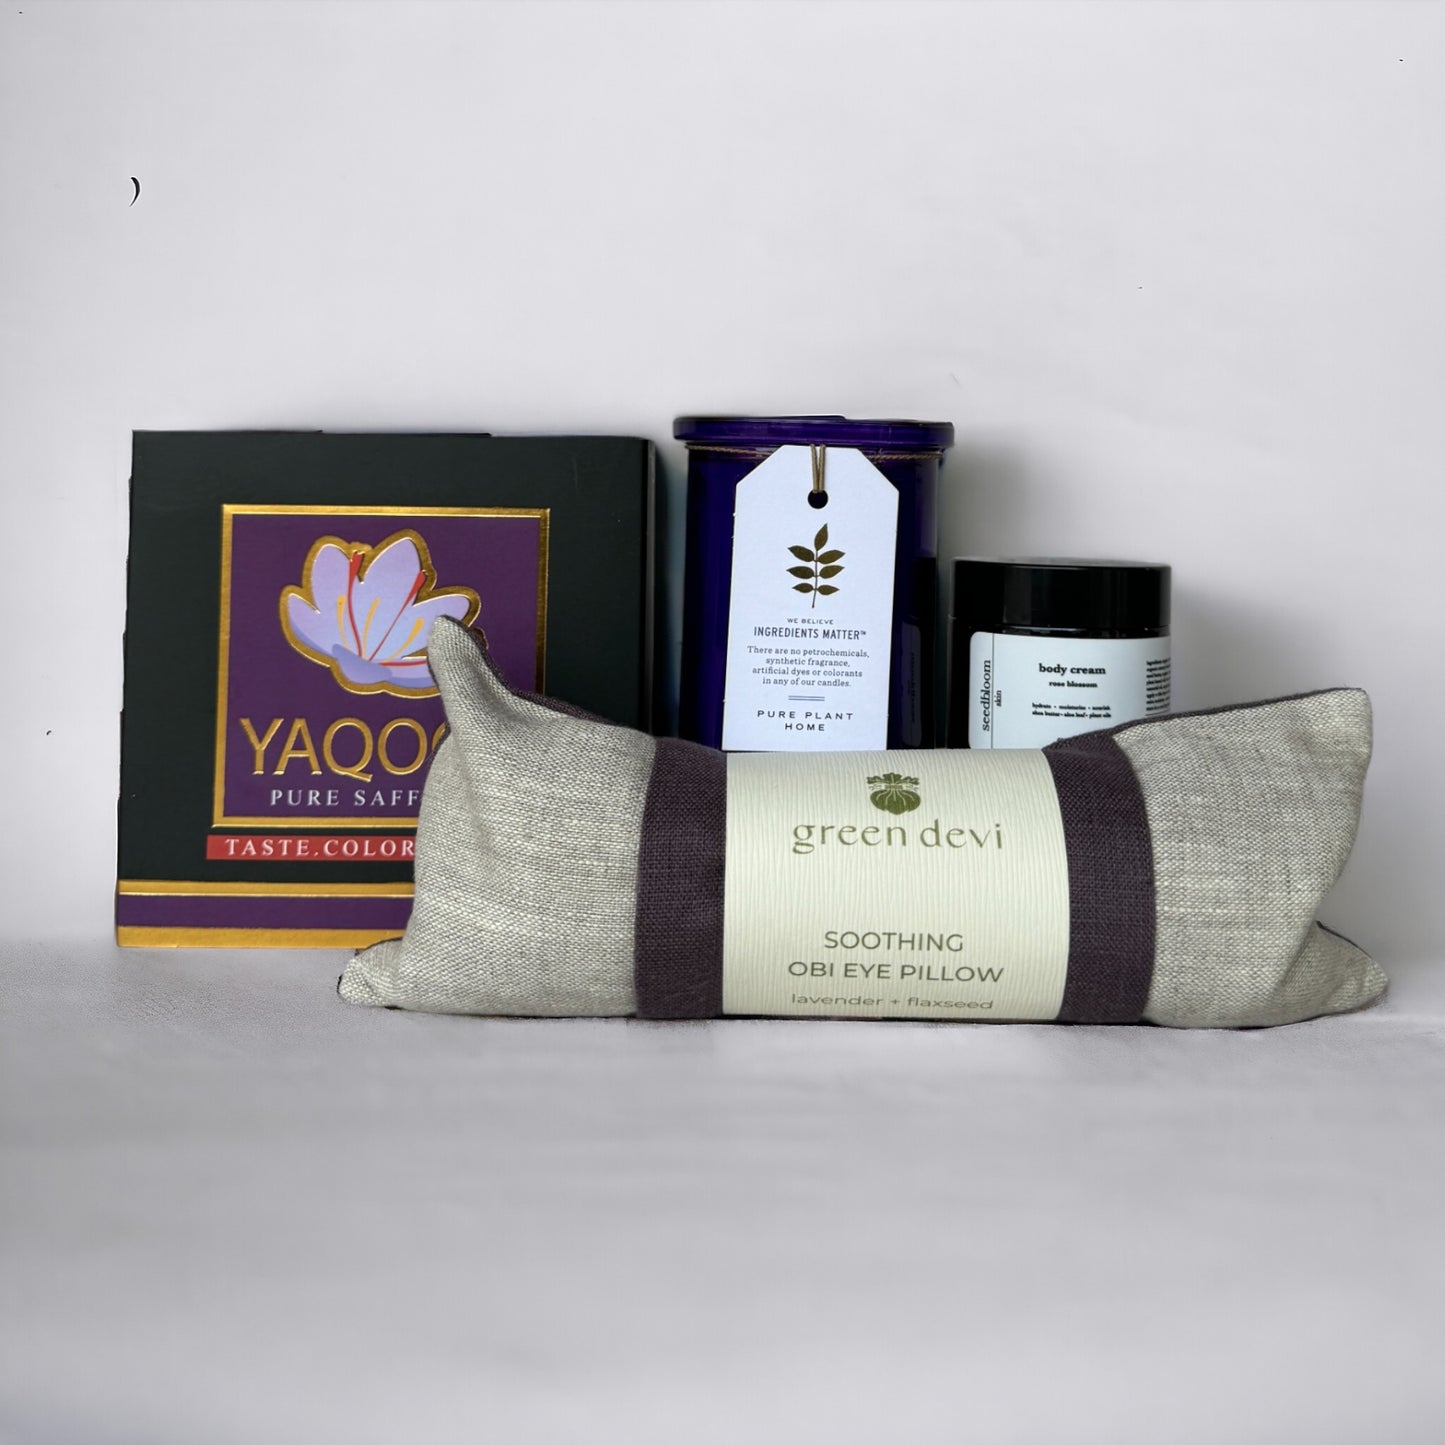 Selections from the Rejuvenation Box: eye pillow, lavender candle, body lotion, and saffron on white background